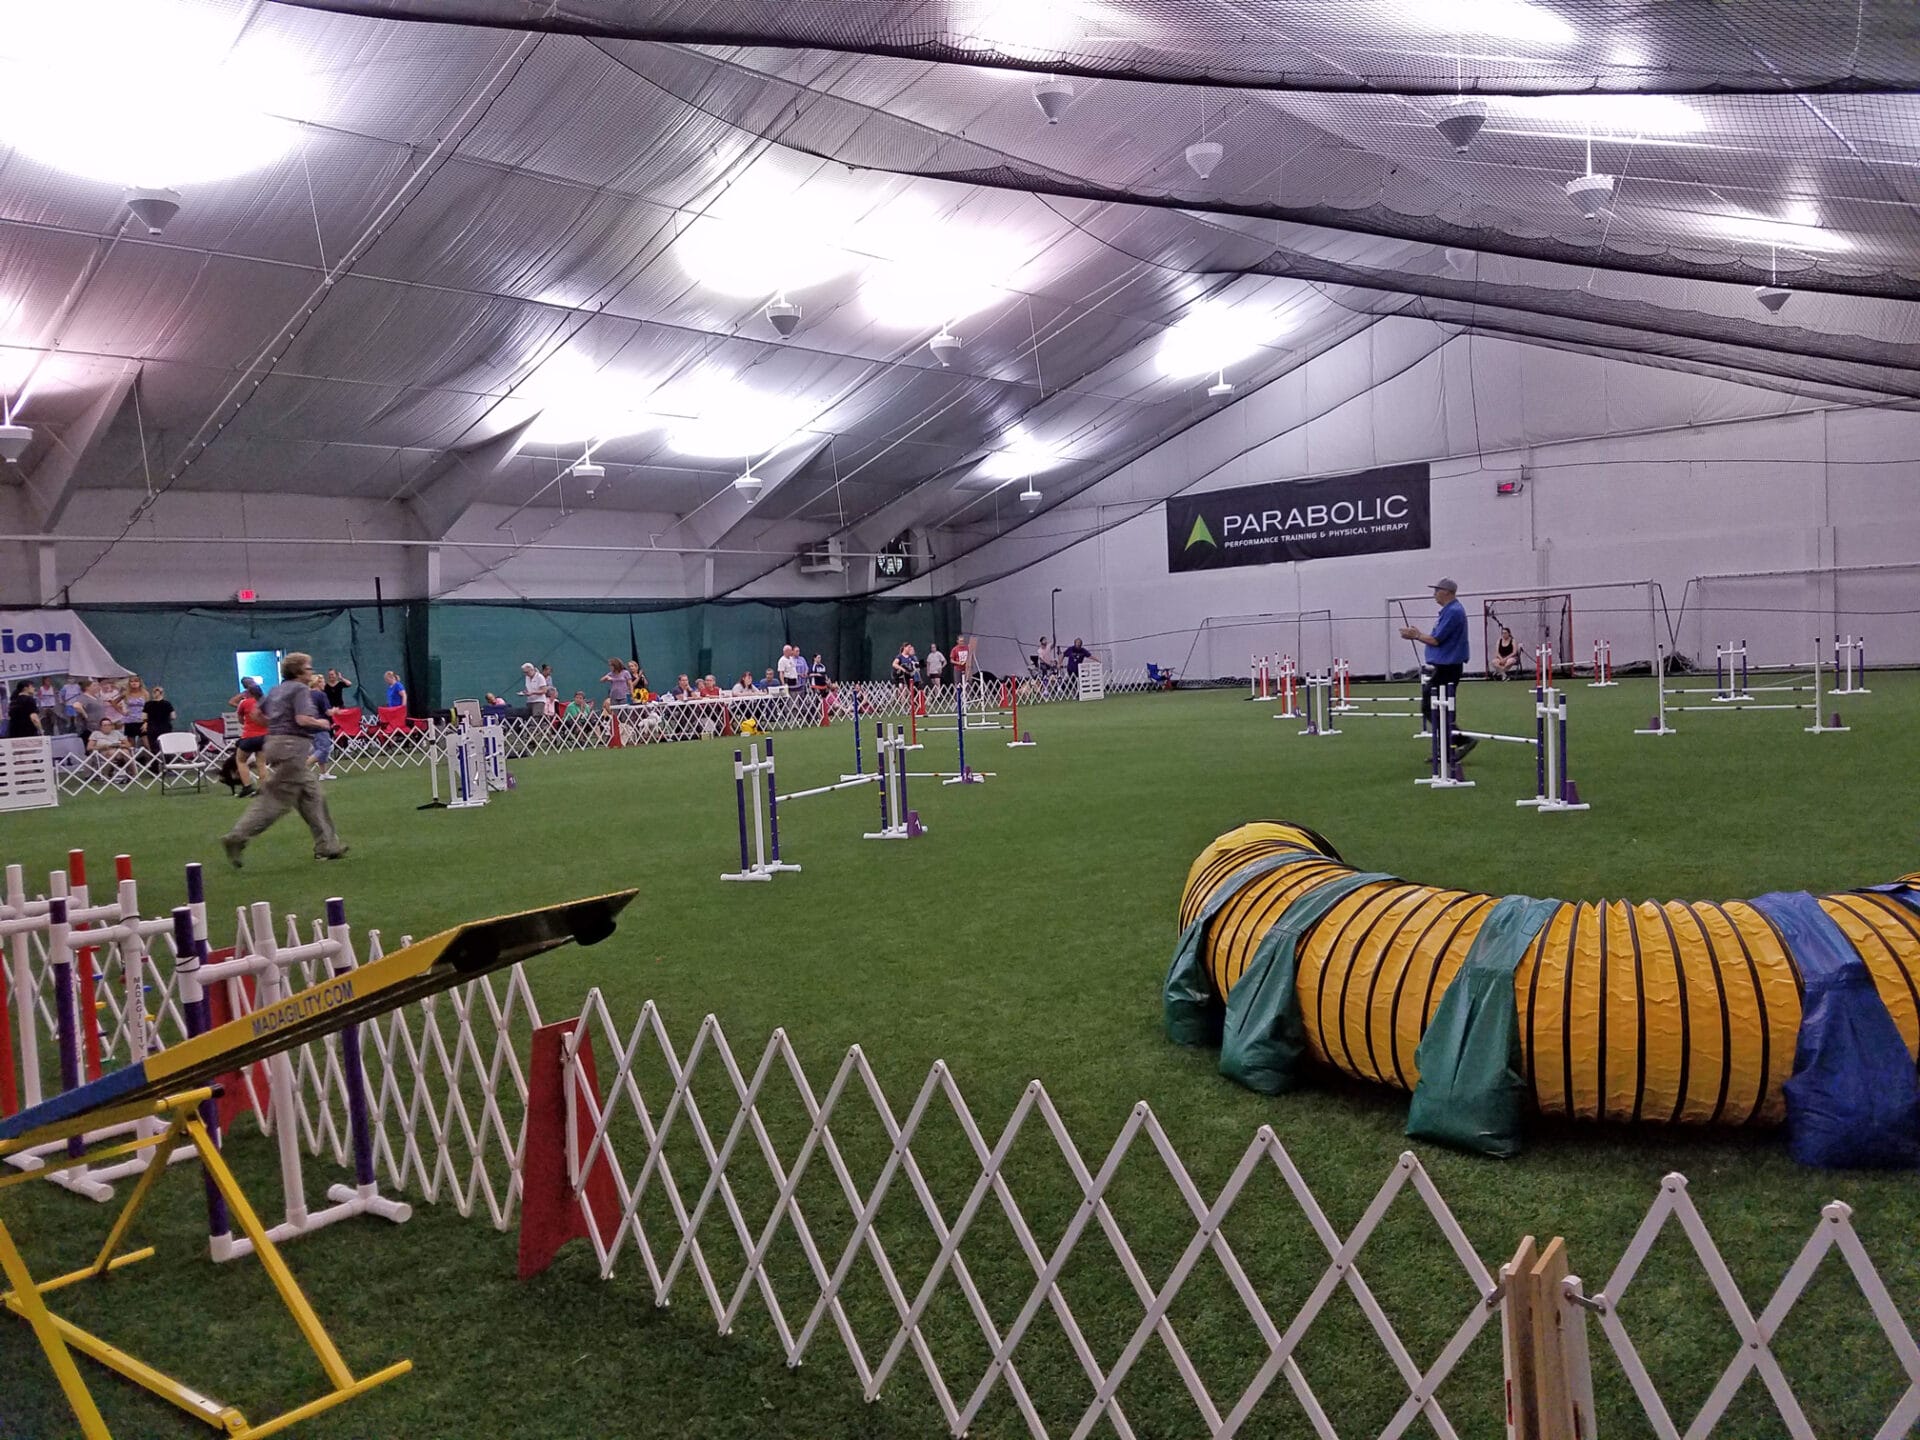 Agility ring set up for jumpers at Sports Domain Academy, Clifton NJ